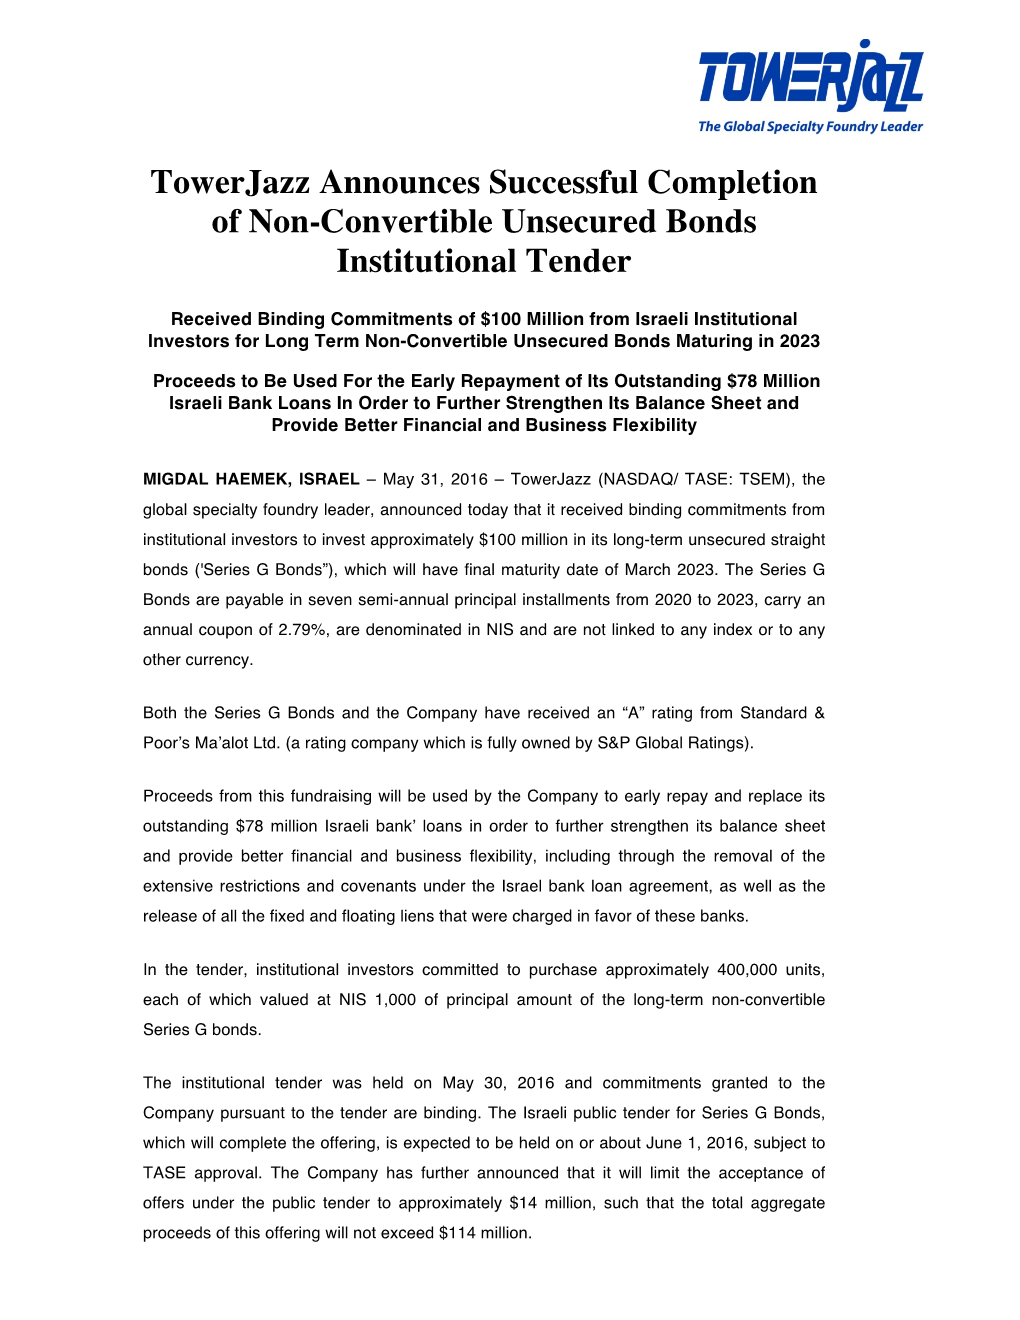 Towerjazz Announces Successful Completion of Non-Convertible Unsecured Bonds Institutional Tender